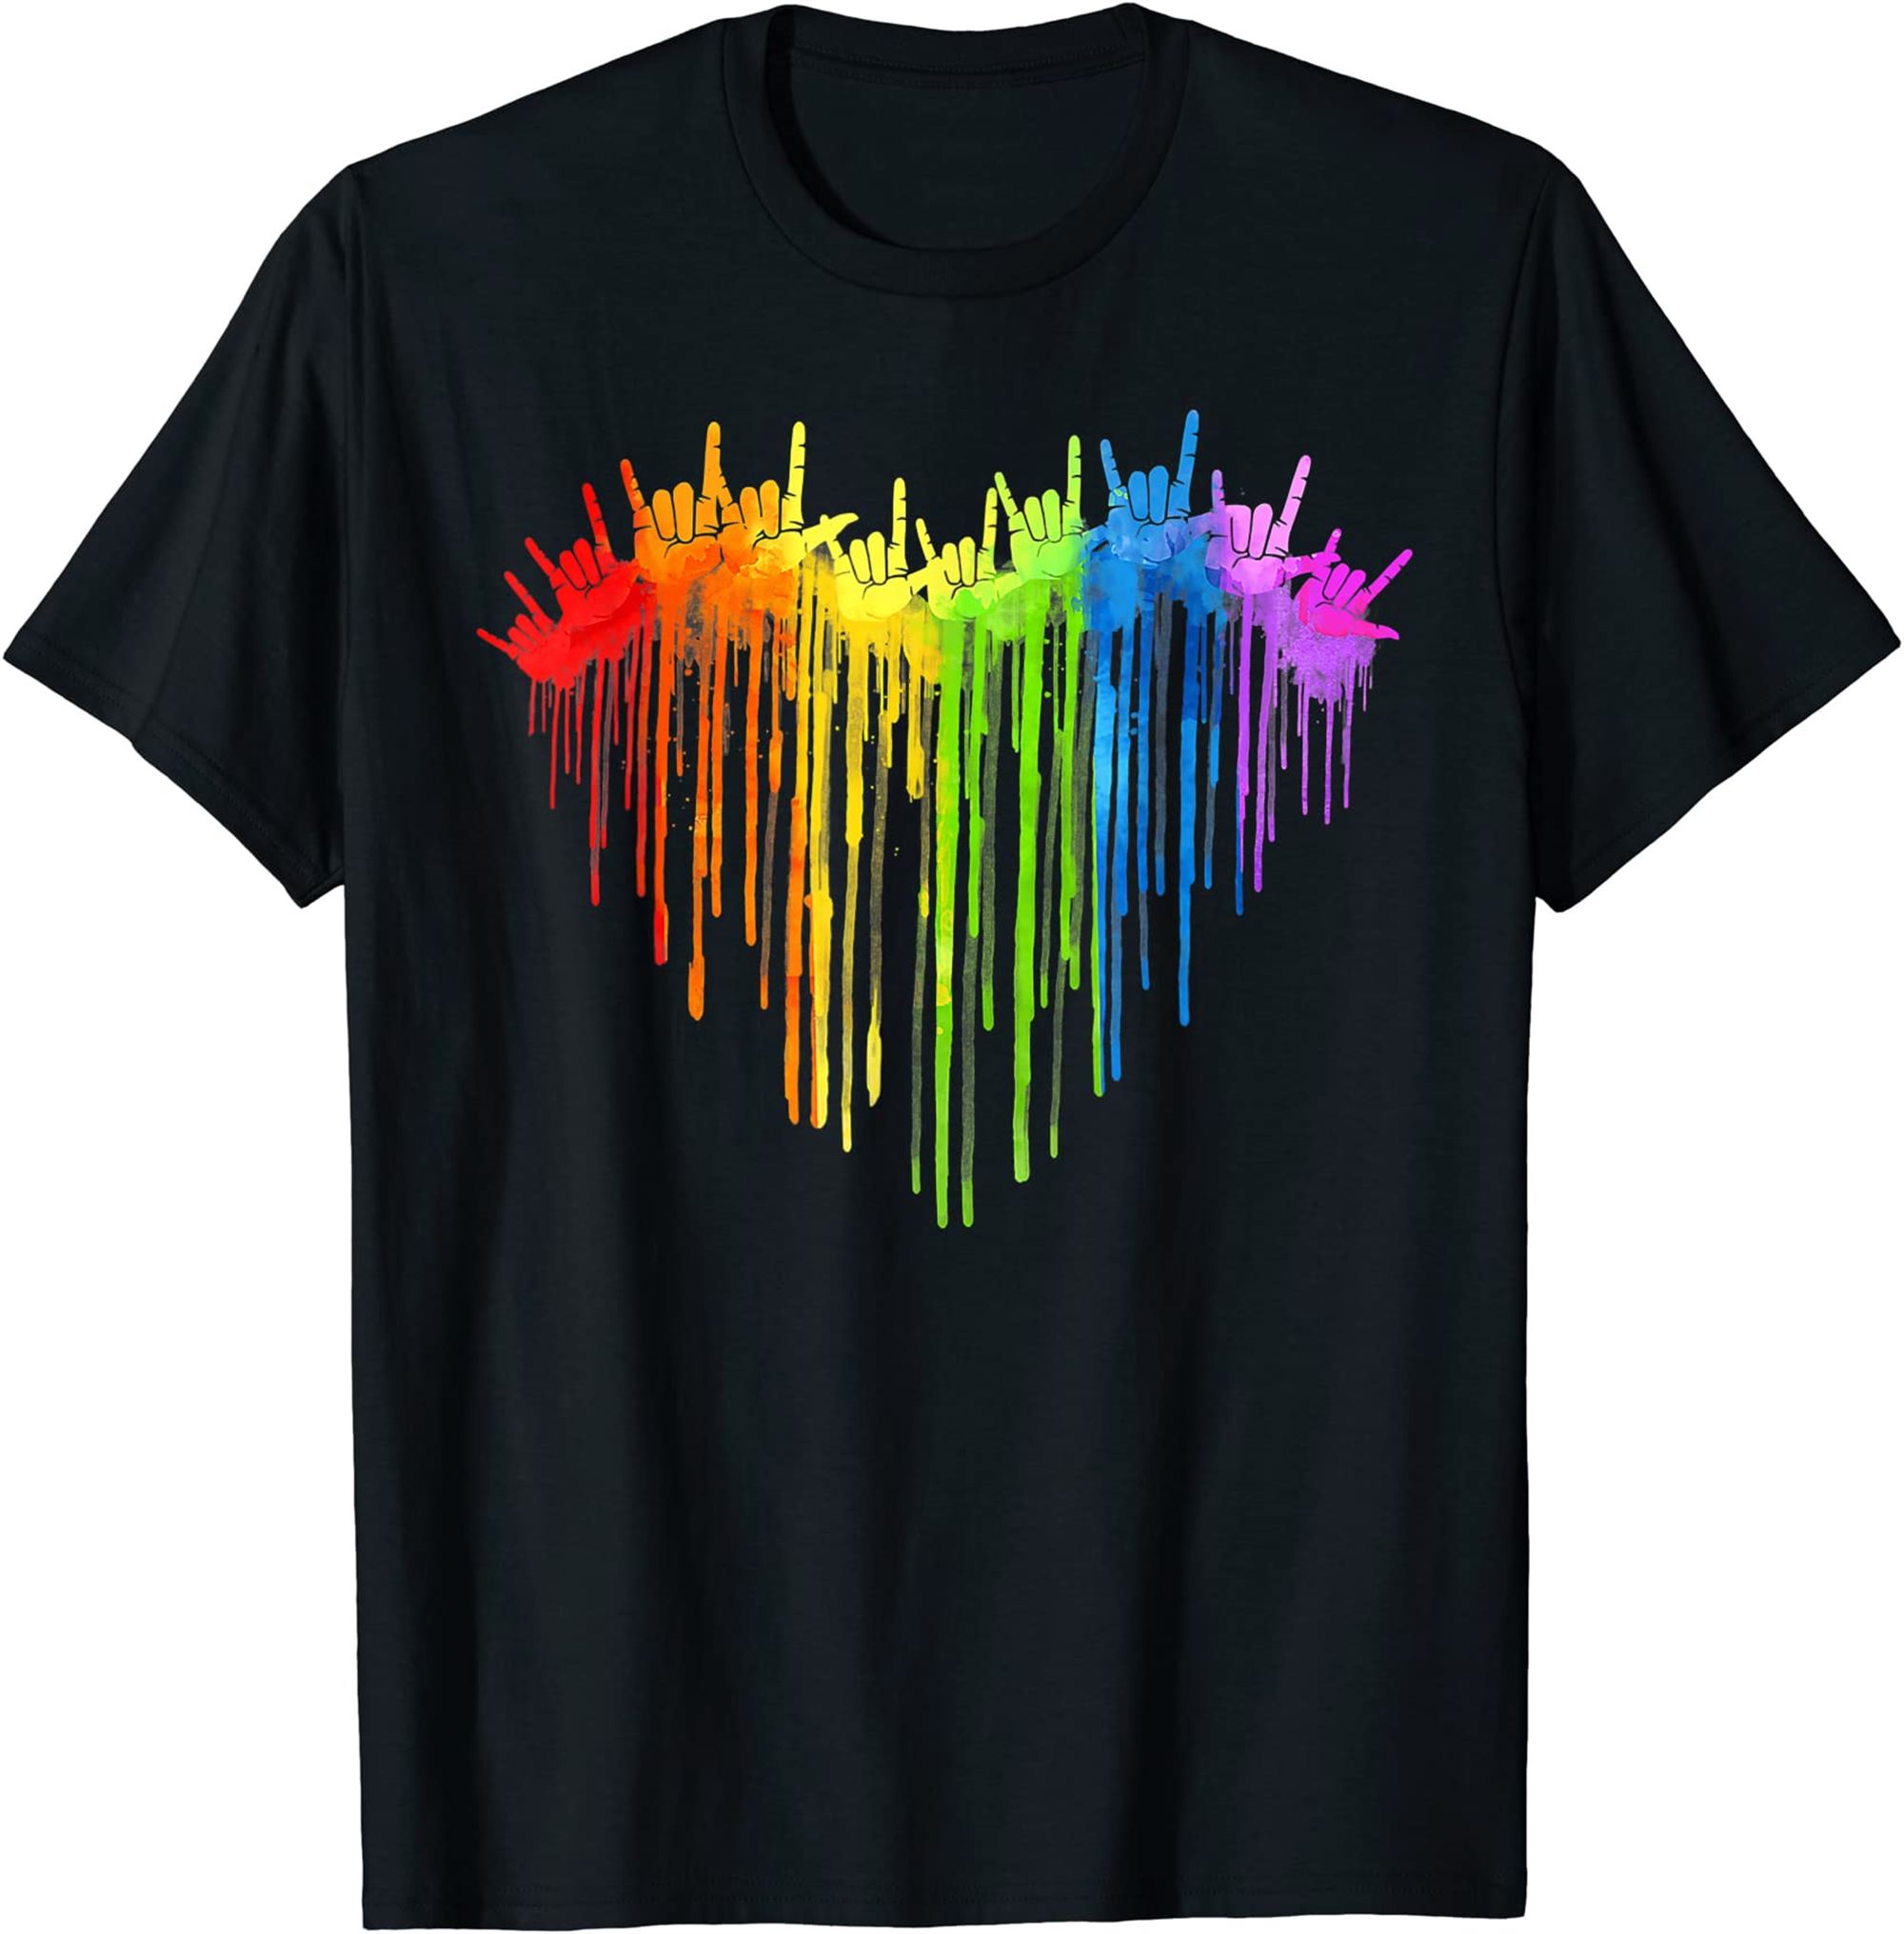 I Love You Hand Sign Rainbow Heart Asl Gay Pride Lgbt T-shirt Size Up To 5xl